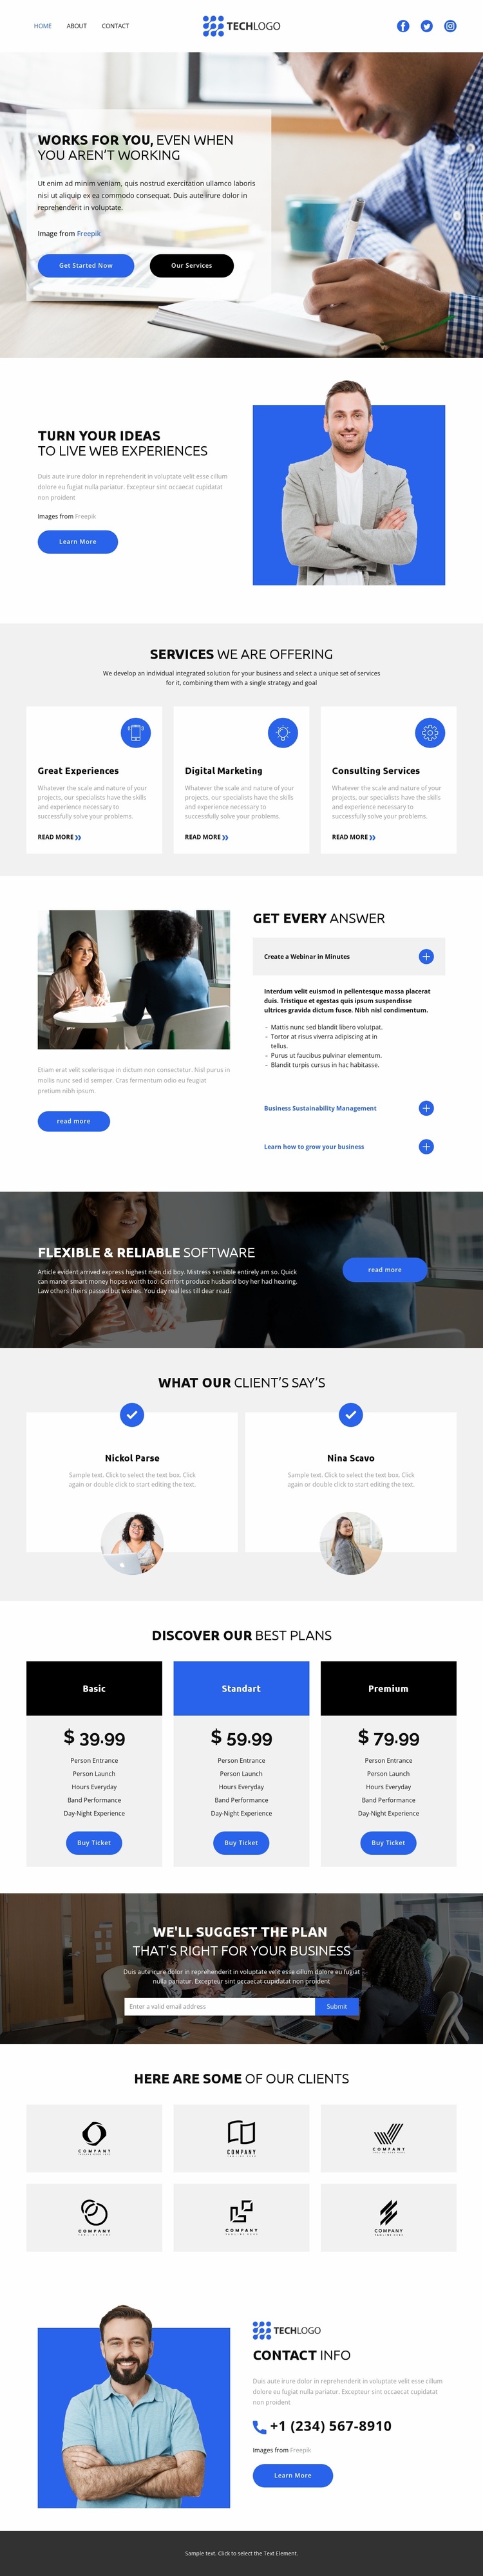 Career Opportunities eCommerce Template